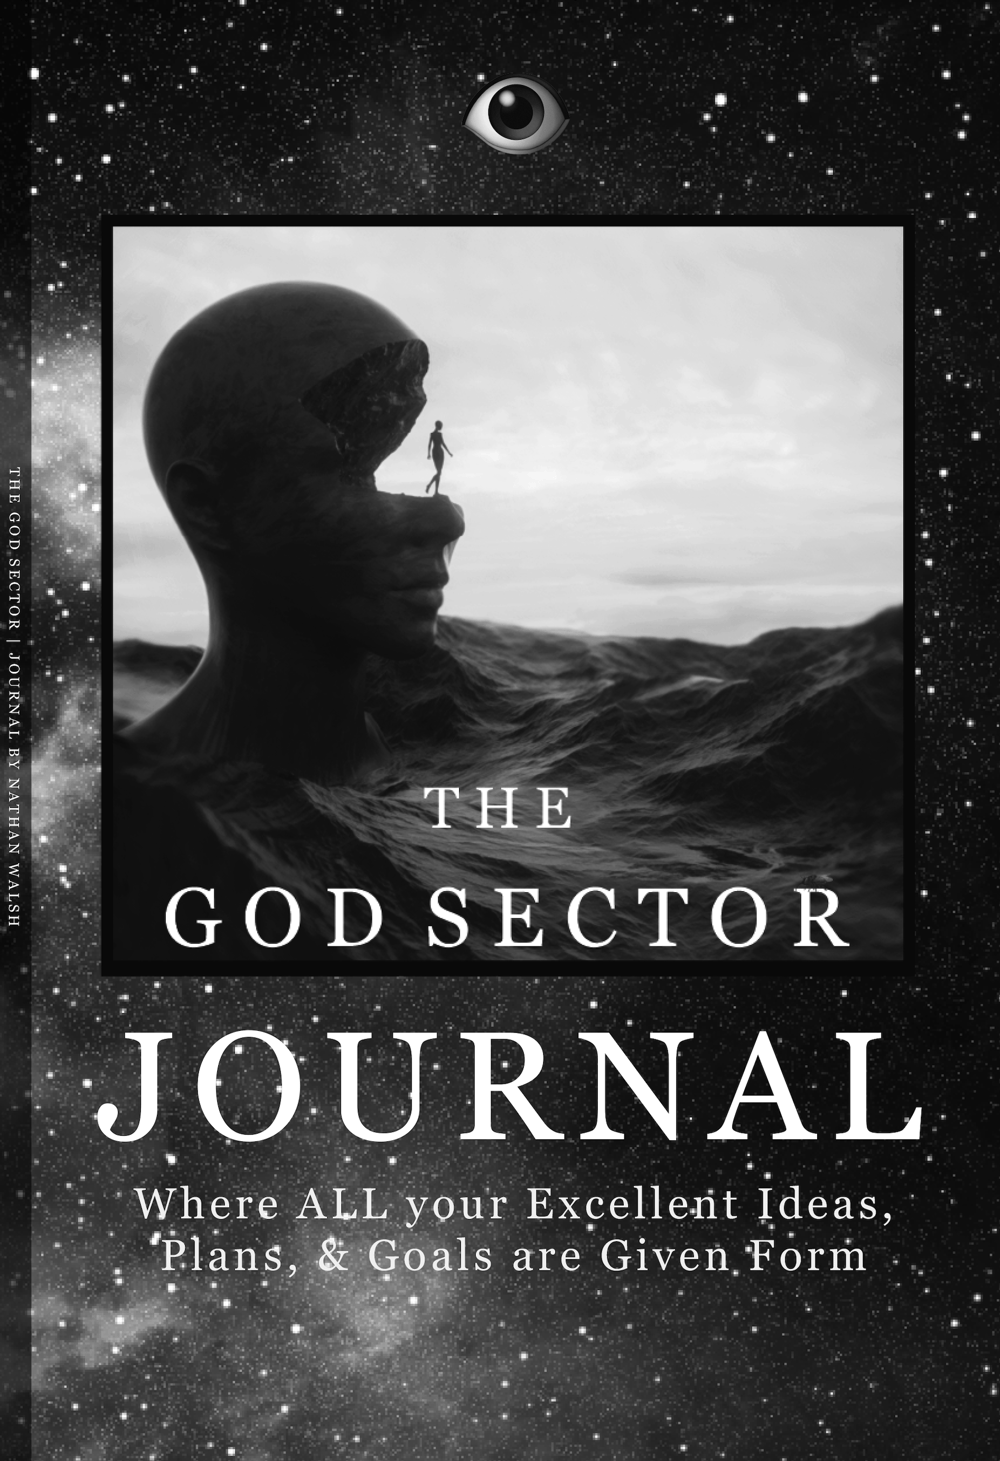 The God Sector Journal + Consultation Service (Package Deal)